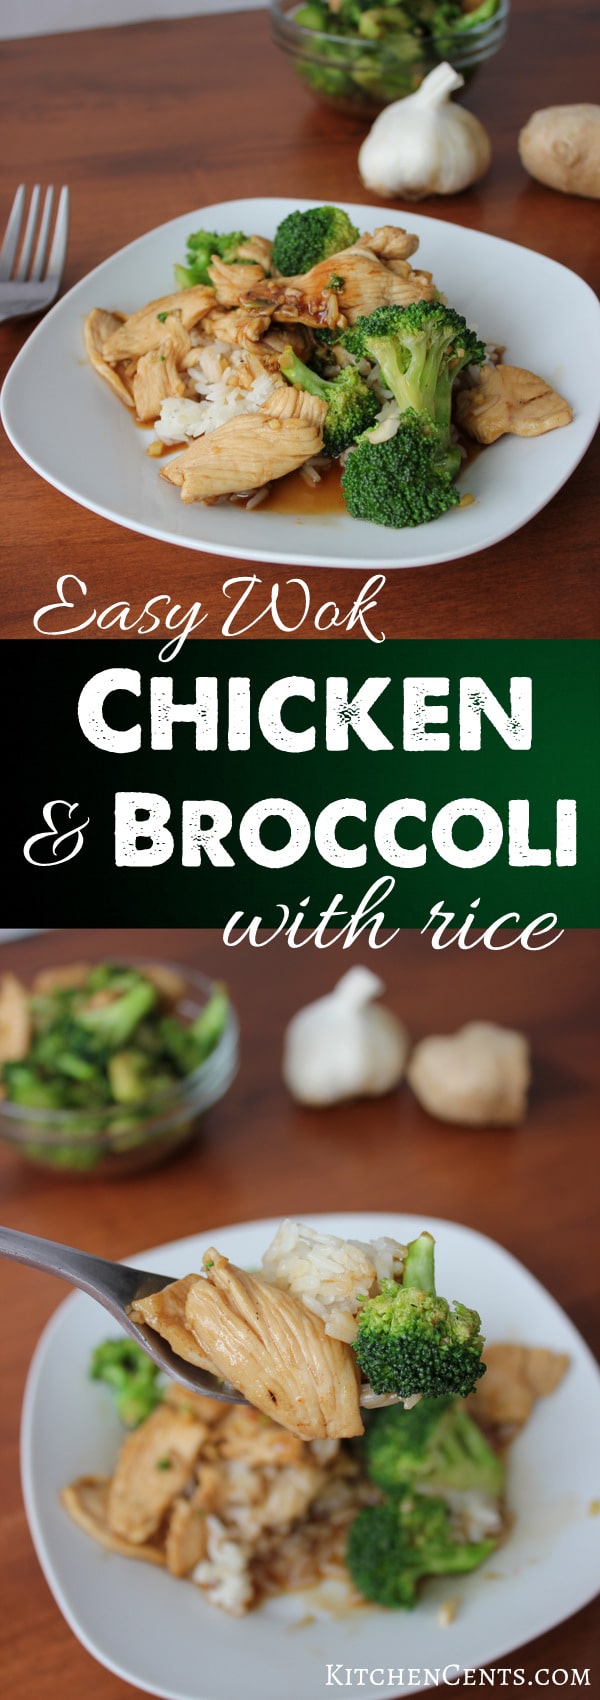 Easy Wok Chicken and Broccoli with rice | KitchenCents.com